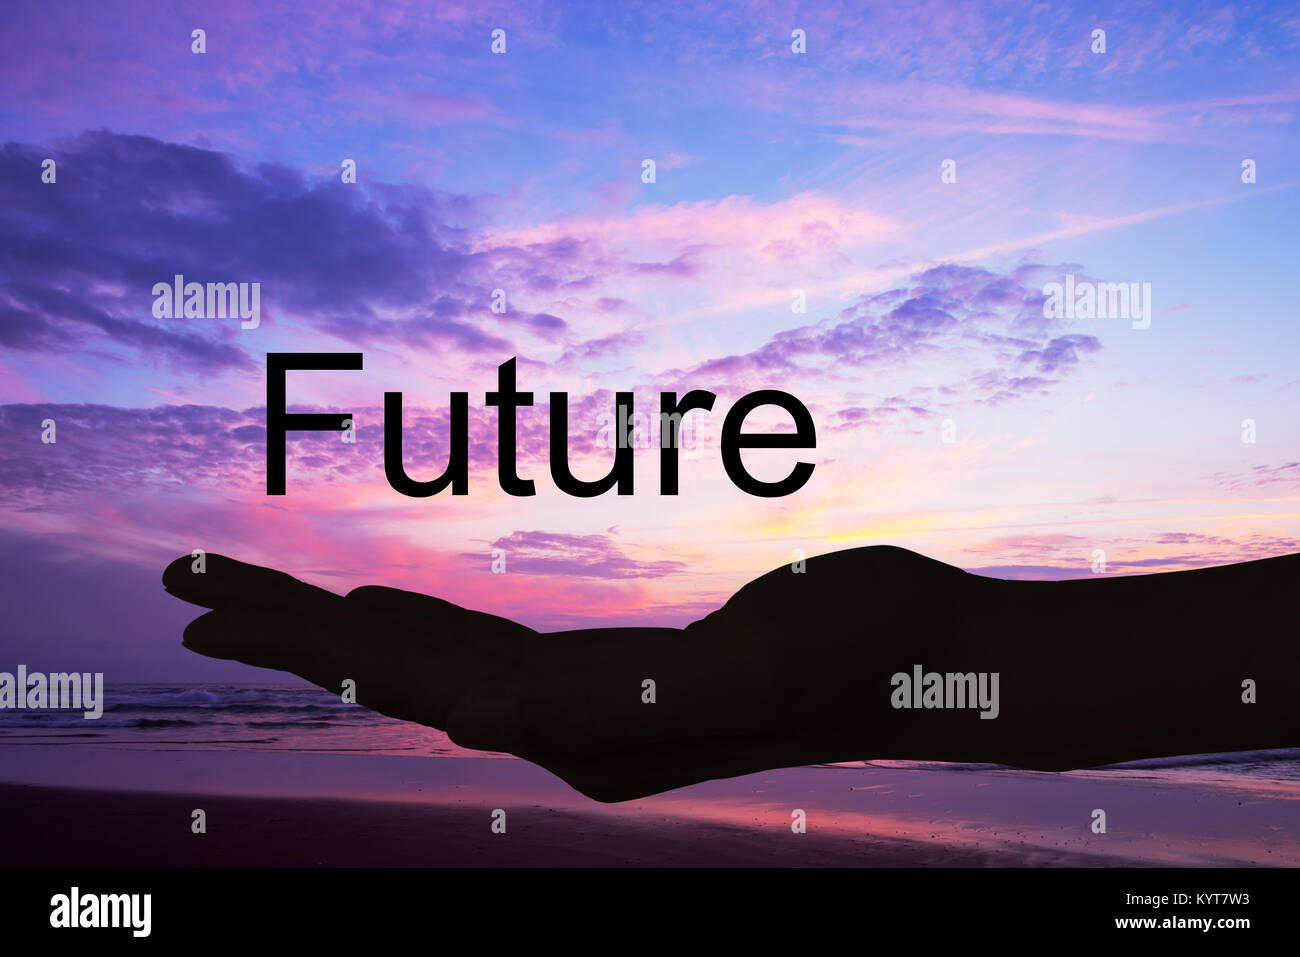 Hand offering the word future, sunset background Stock Photo